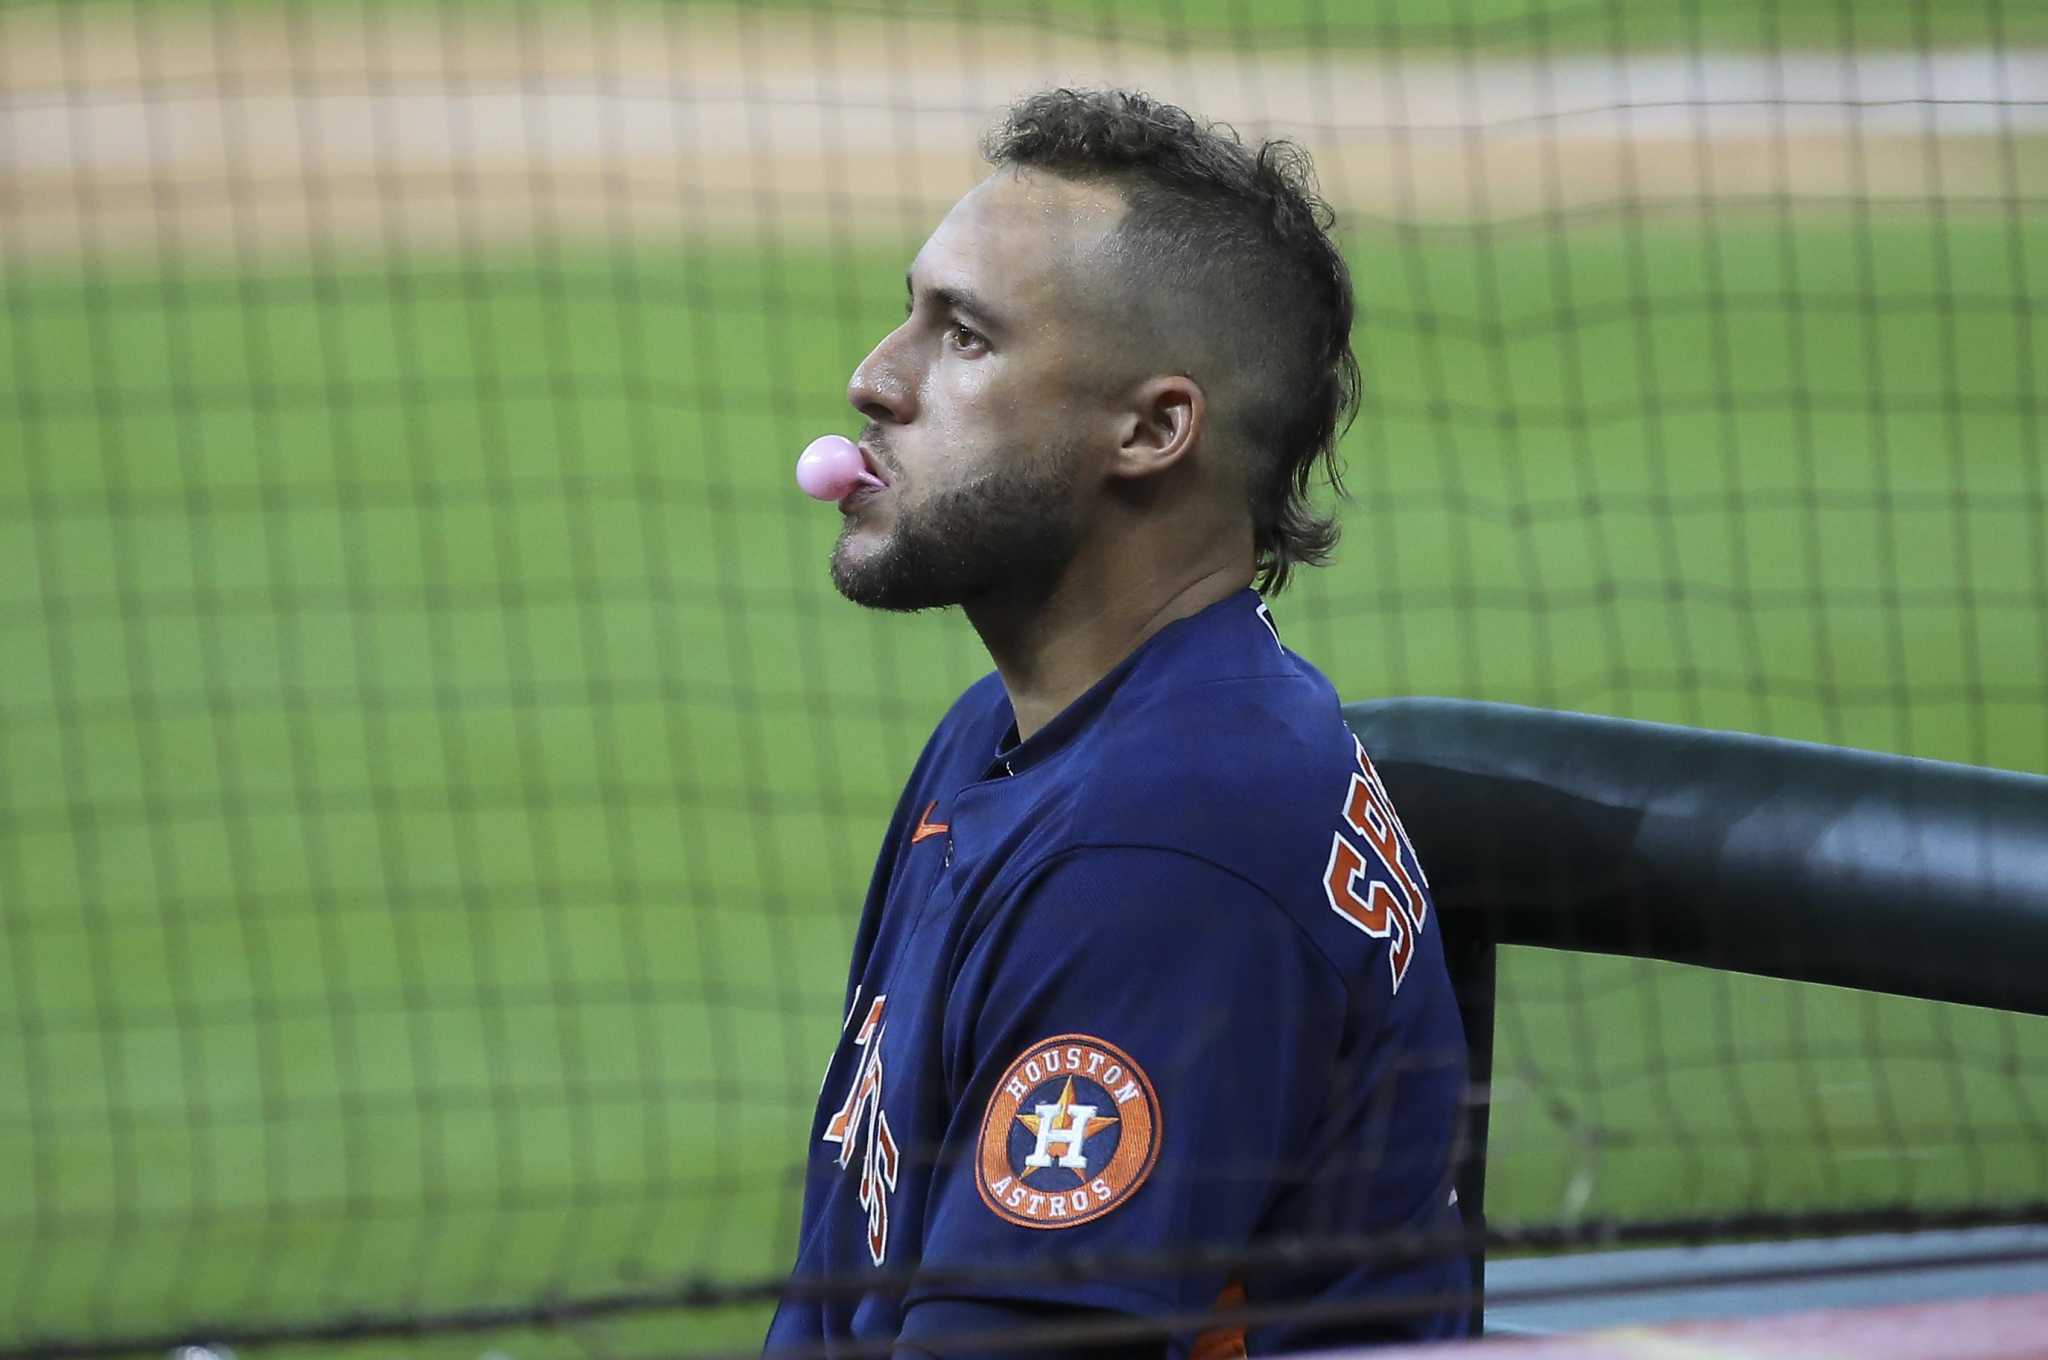 Big League Stew — George Springer has some strong hair game in the